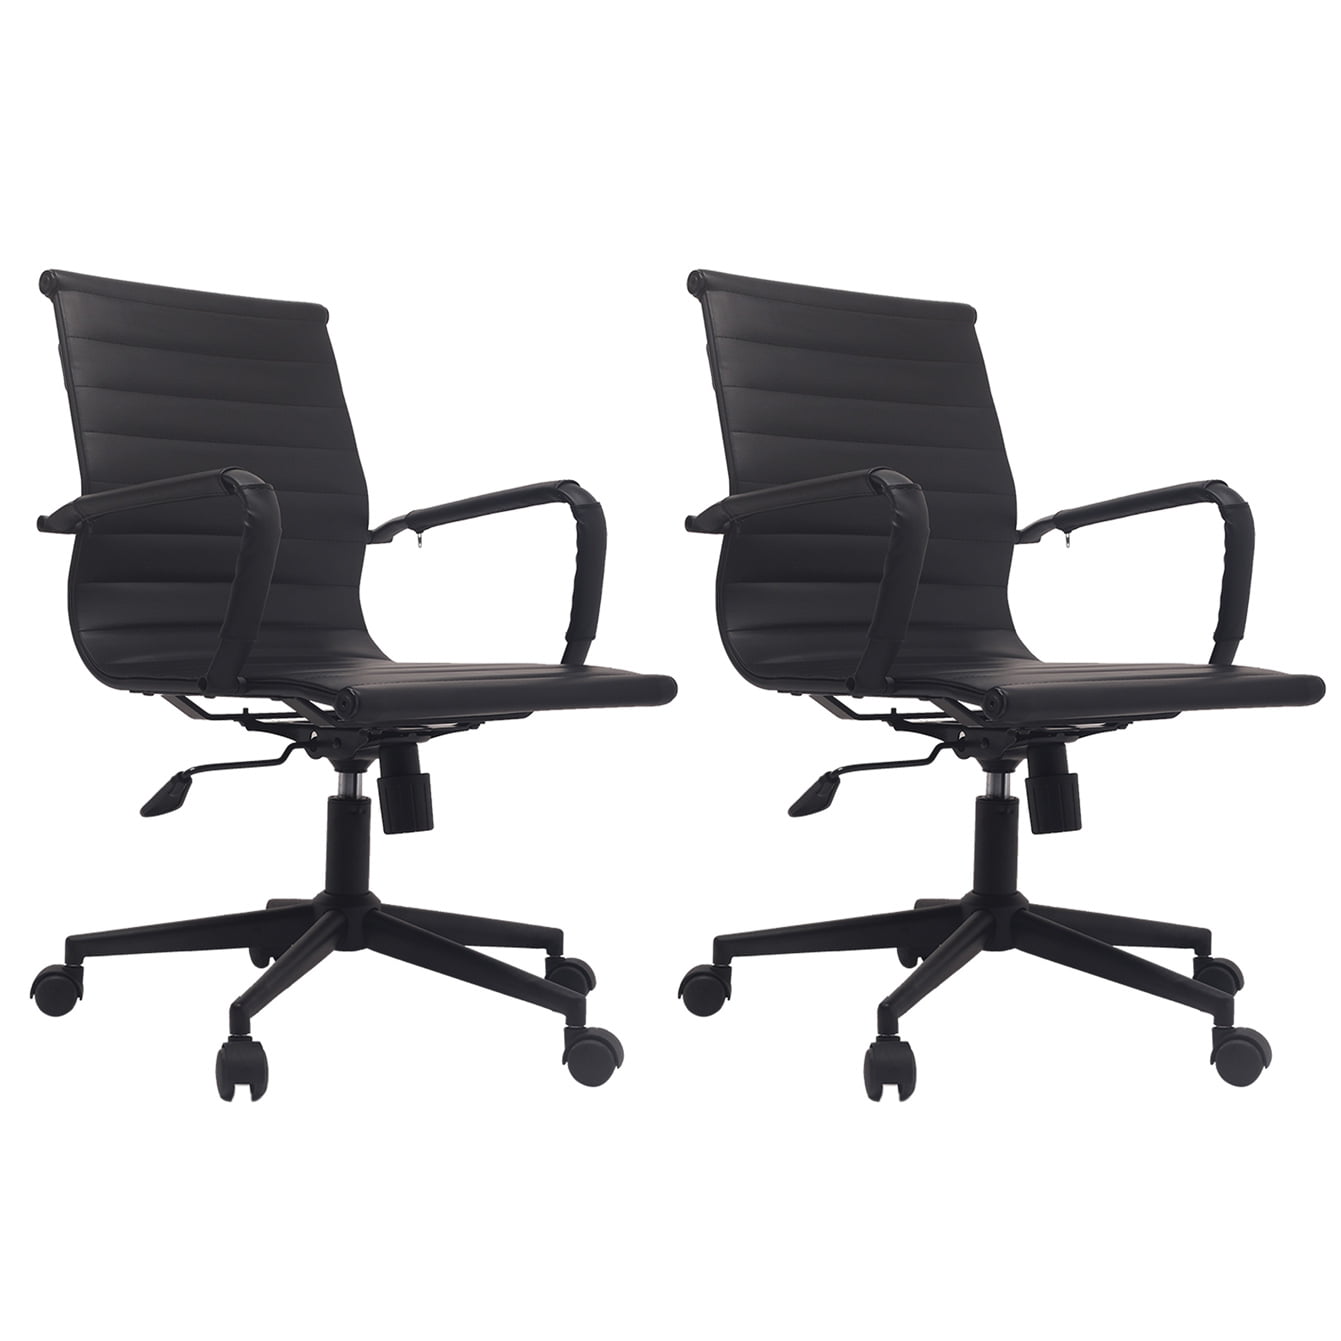 2xhome Set of 2 Mid Century Office Chair With Arms Wheels Modern Black